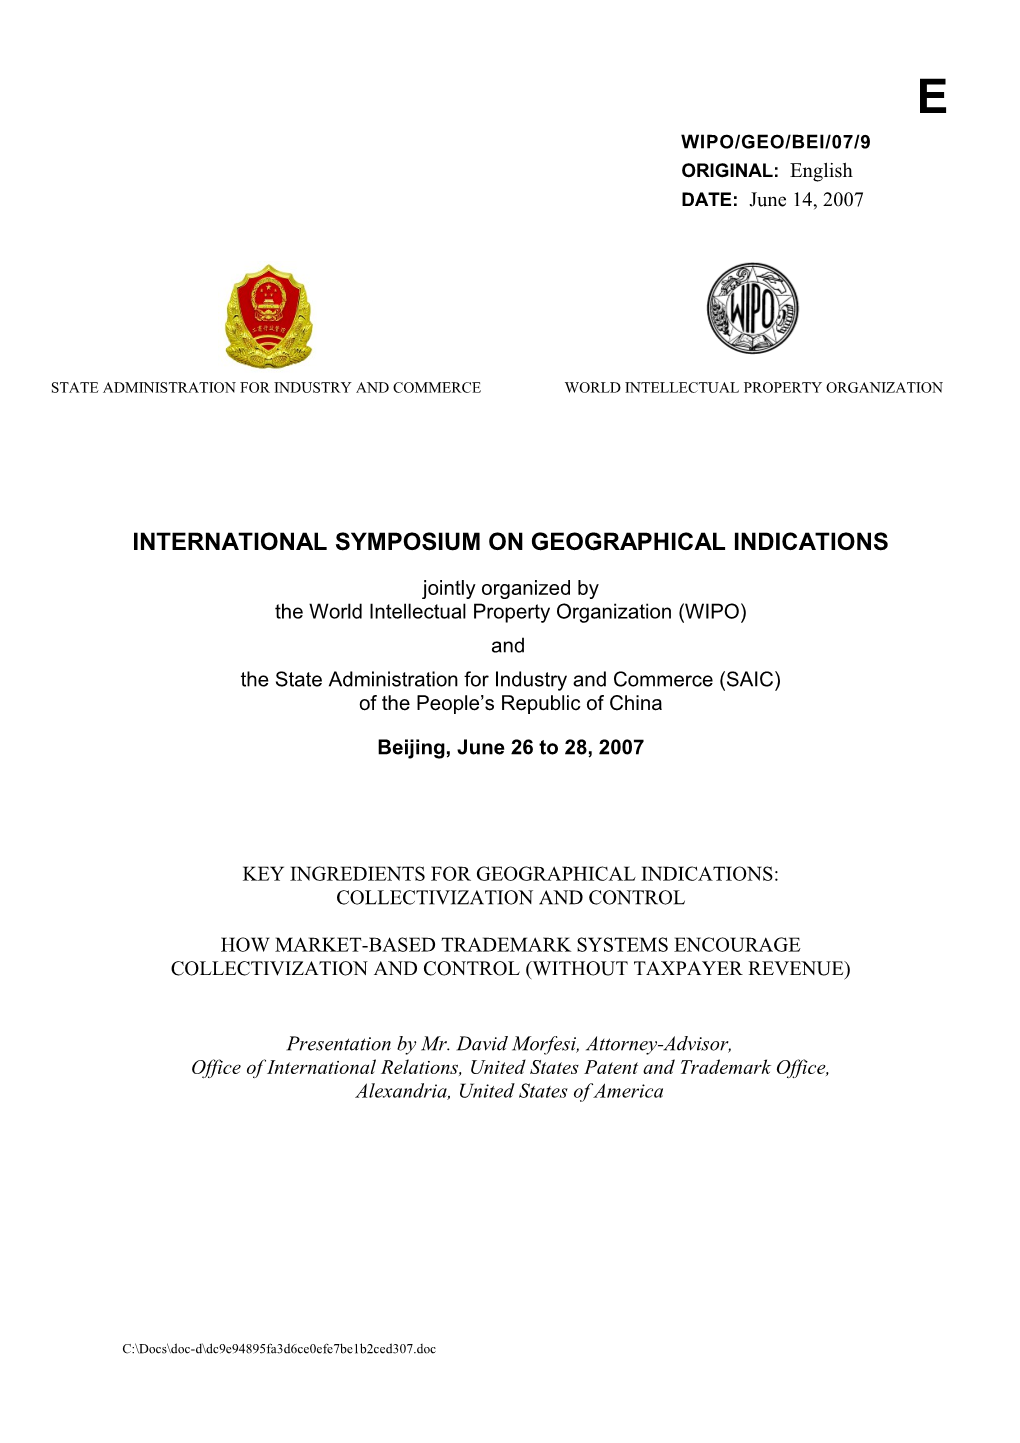 WIPO/GEO/BEI/07/WWW 81758 : Geographical Indications at the National Level: Collectivization